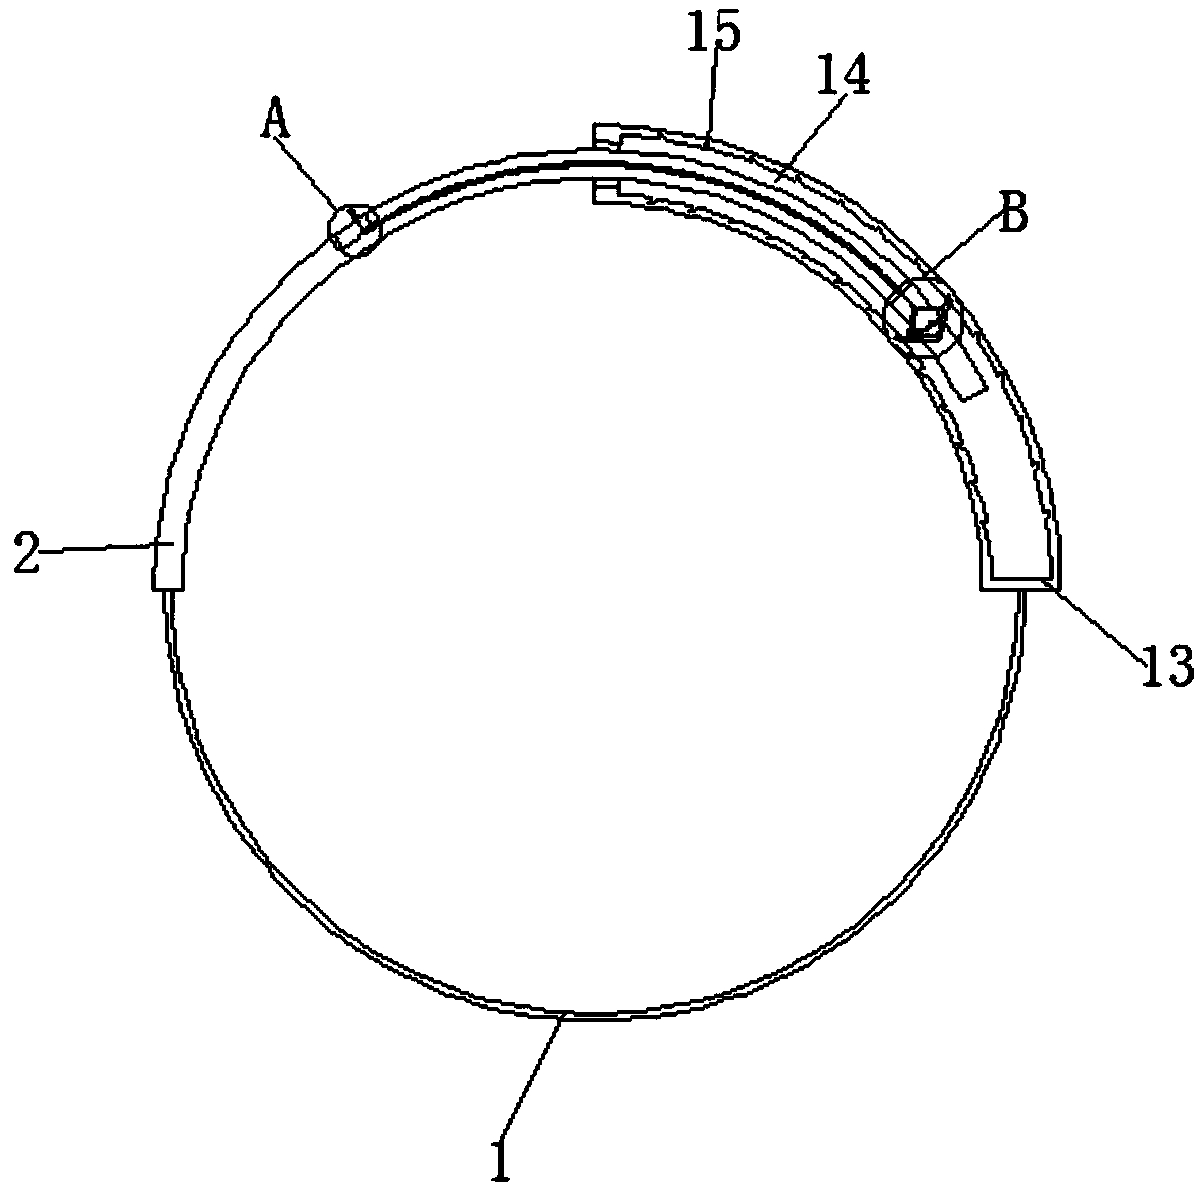 Multi-bundle tight binding device for tin plating alloy coper twisted wire production